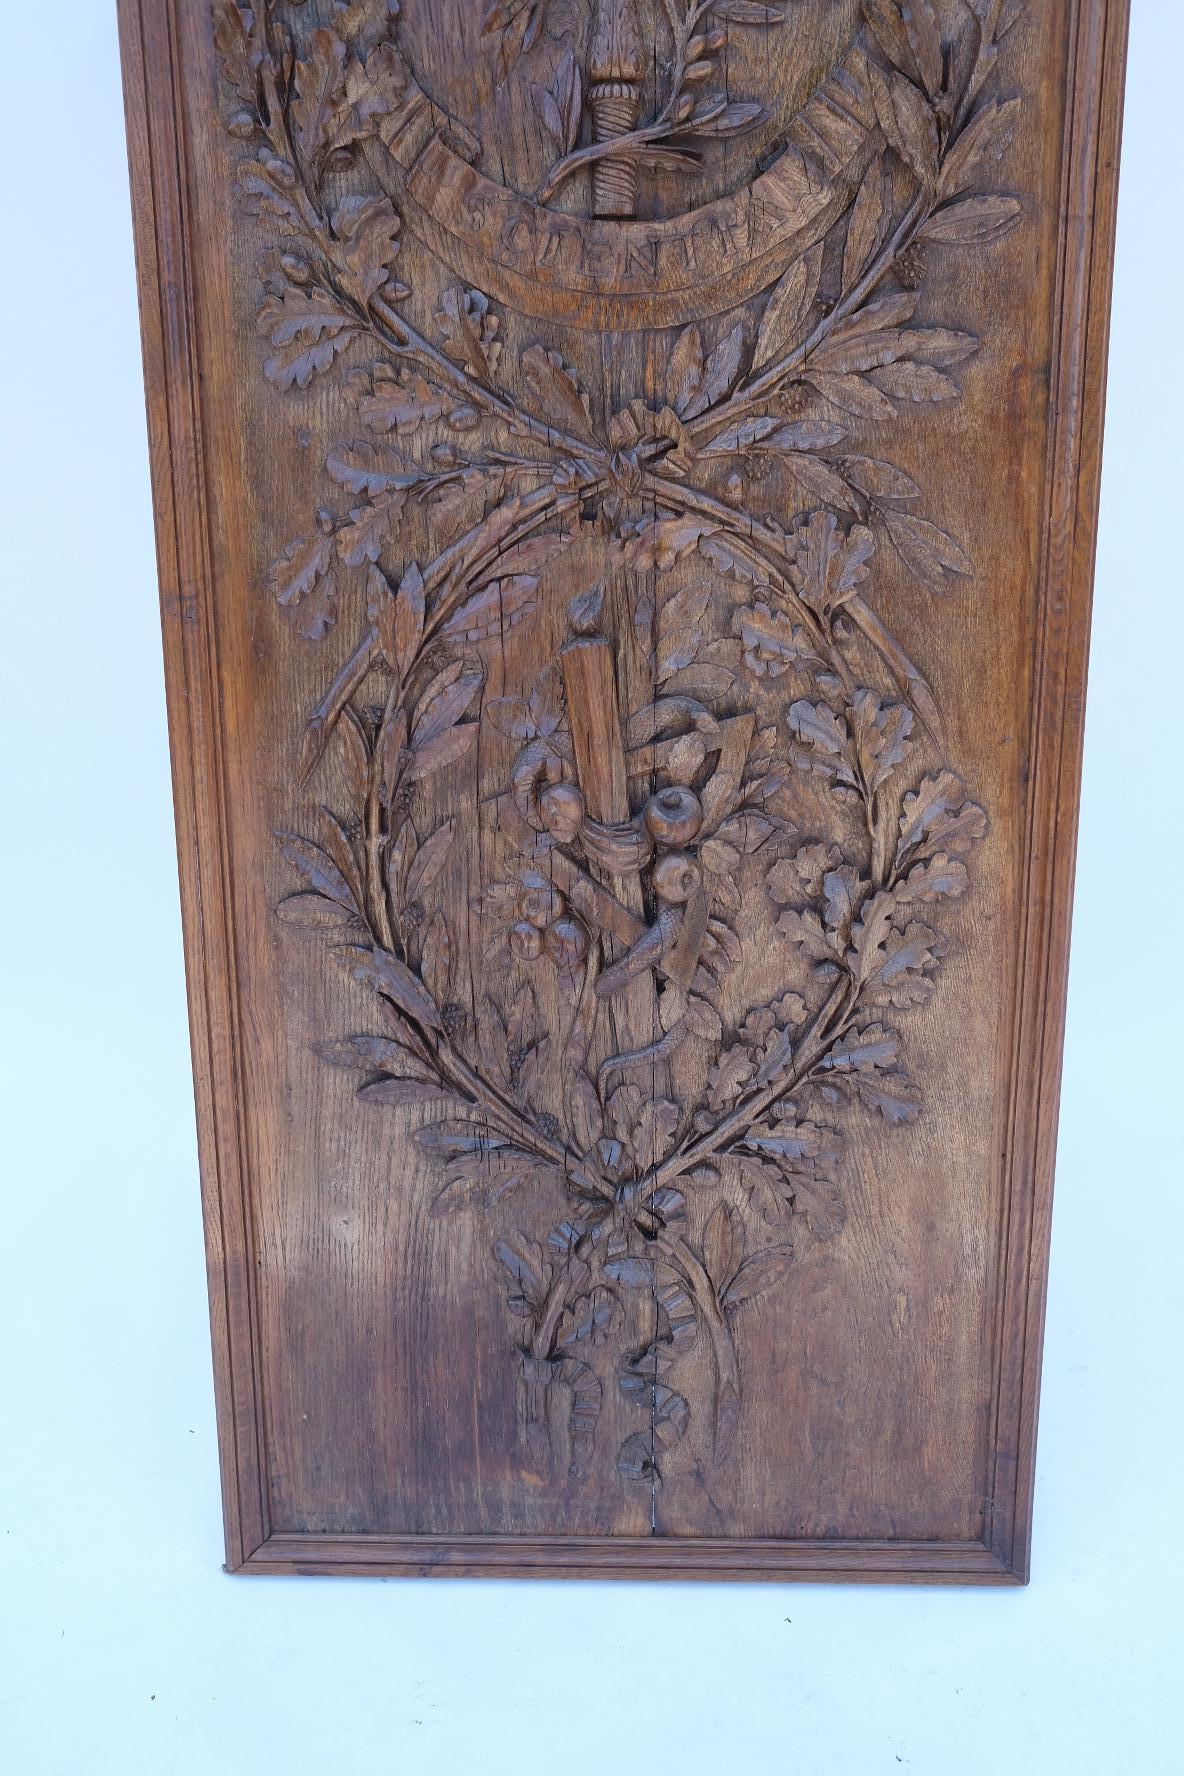 Late 18th Century. French. Very finely carved. Some minor losses to some of the carved details, but very minor.